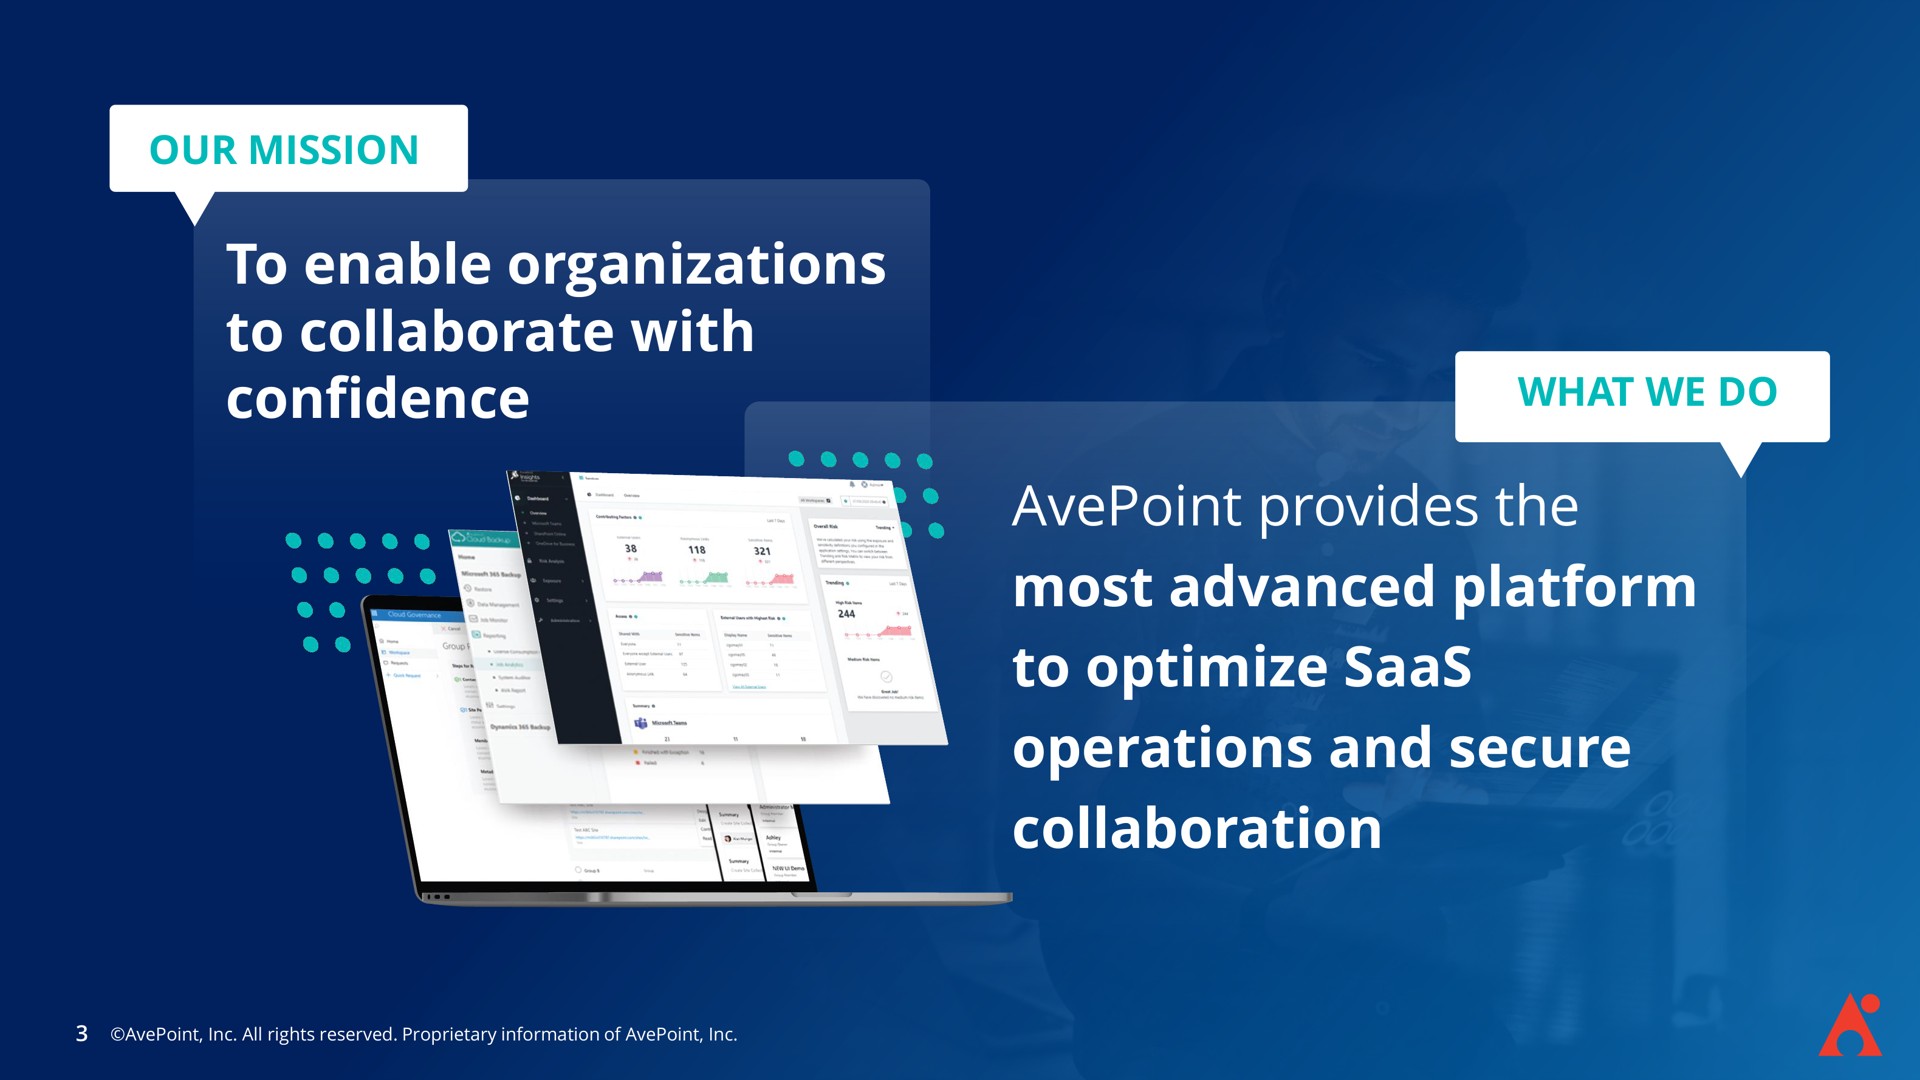 to enable organizations to collaborate with confidence provides the most advanced platform to optimize operations and secure collaboration | AvePoint